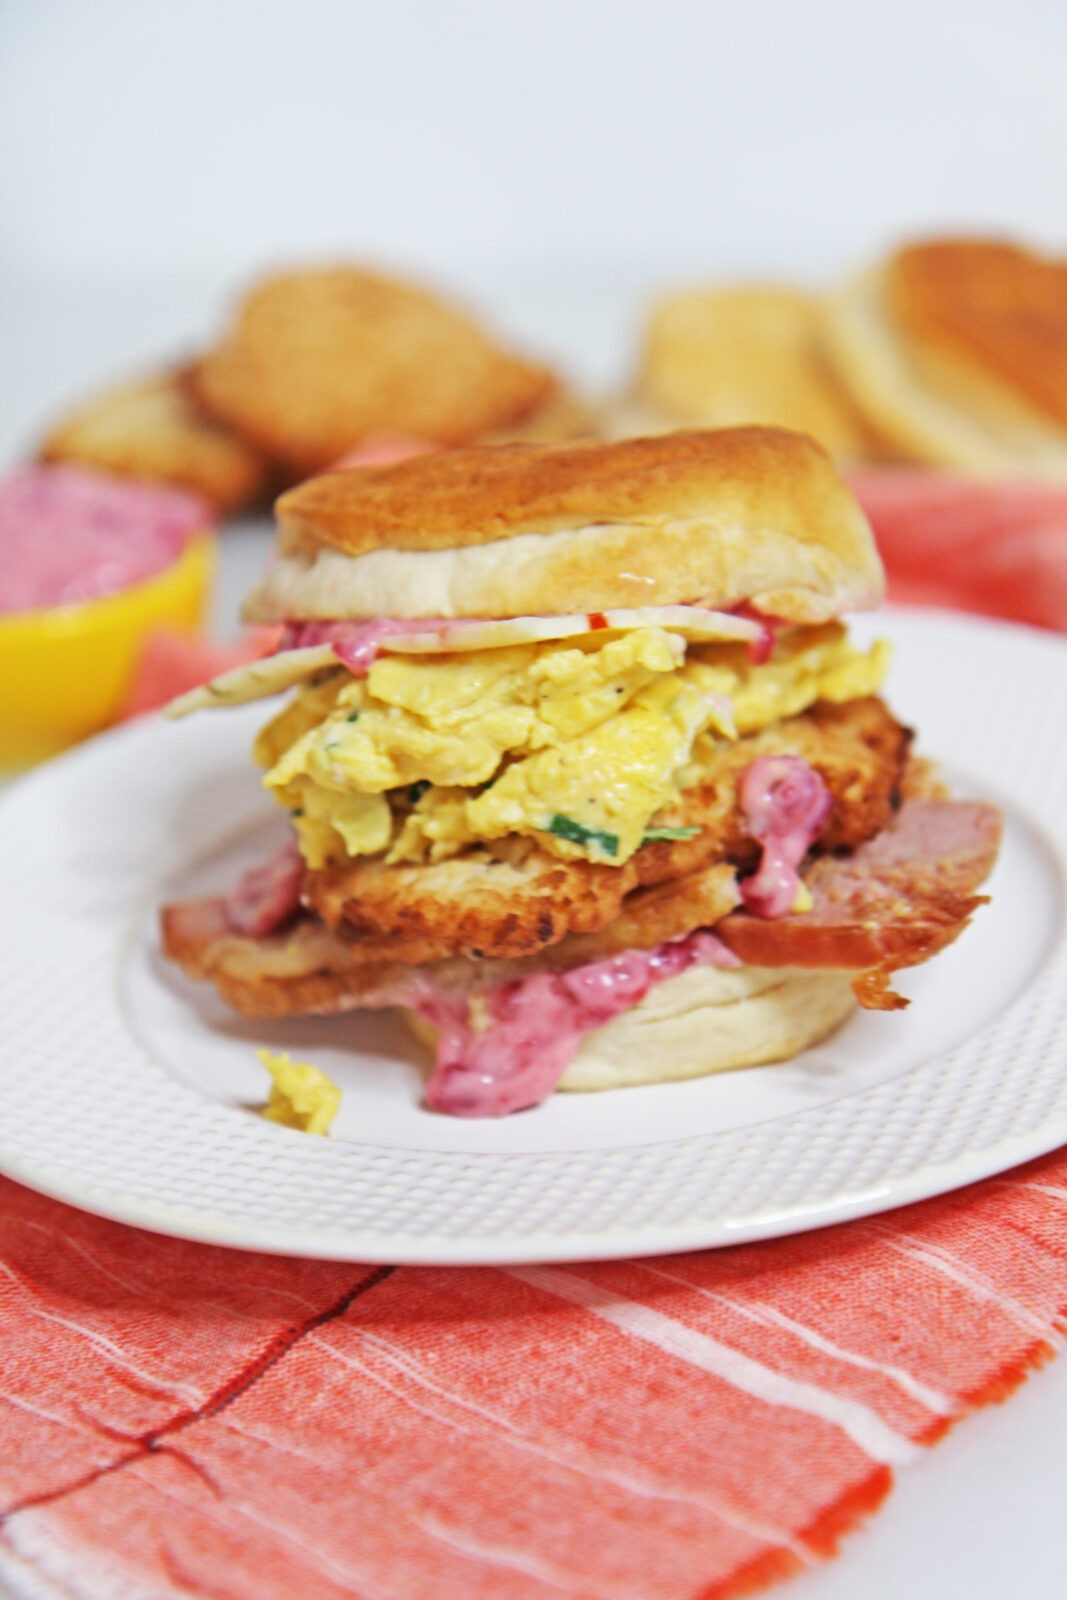 Leftover Ham Egg and Potato Pancake Biscuit Sandwich Recipe. After Christmas, Thanksgiving, or Sunday dinner grab you leftovers for the perfect breakfast sandwich. Ham, egg, mashed potatoes, cranberry sauce all make the ultimate brunch biscuit! Happy Cooking! www.ChopHappy.com #leftovers #ham